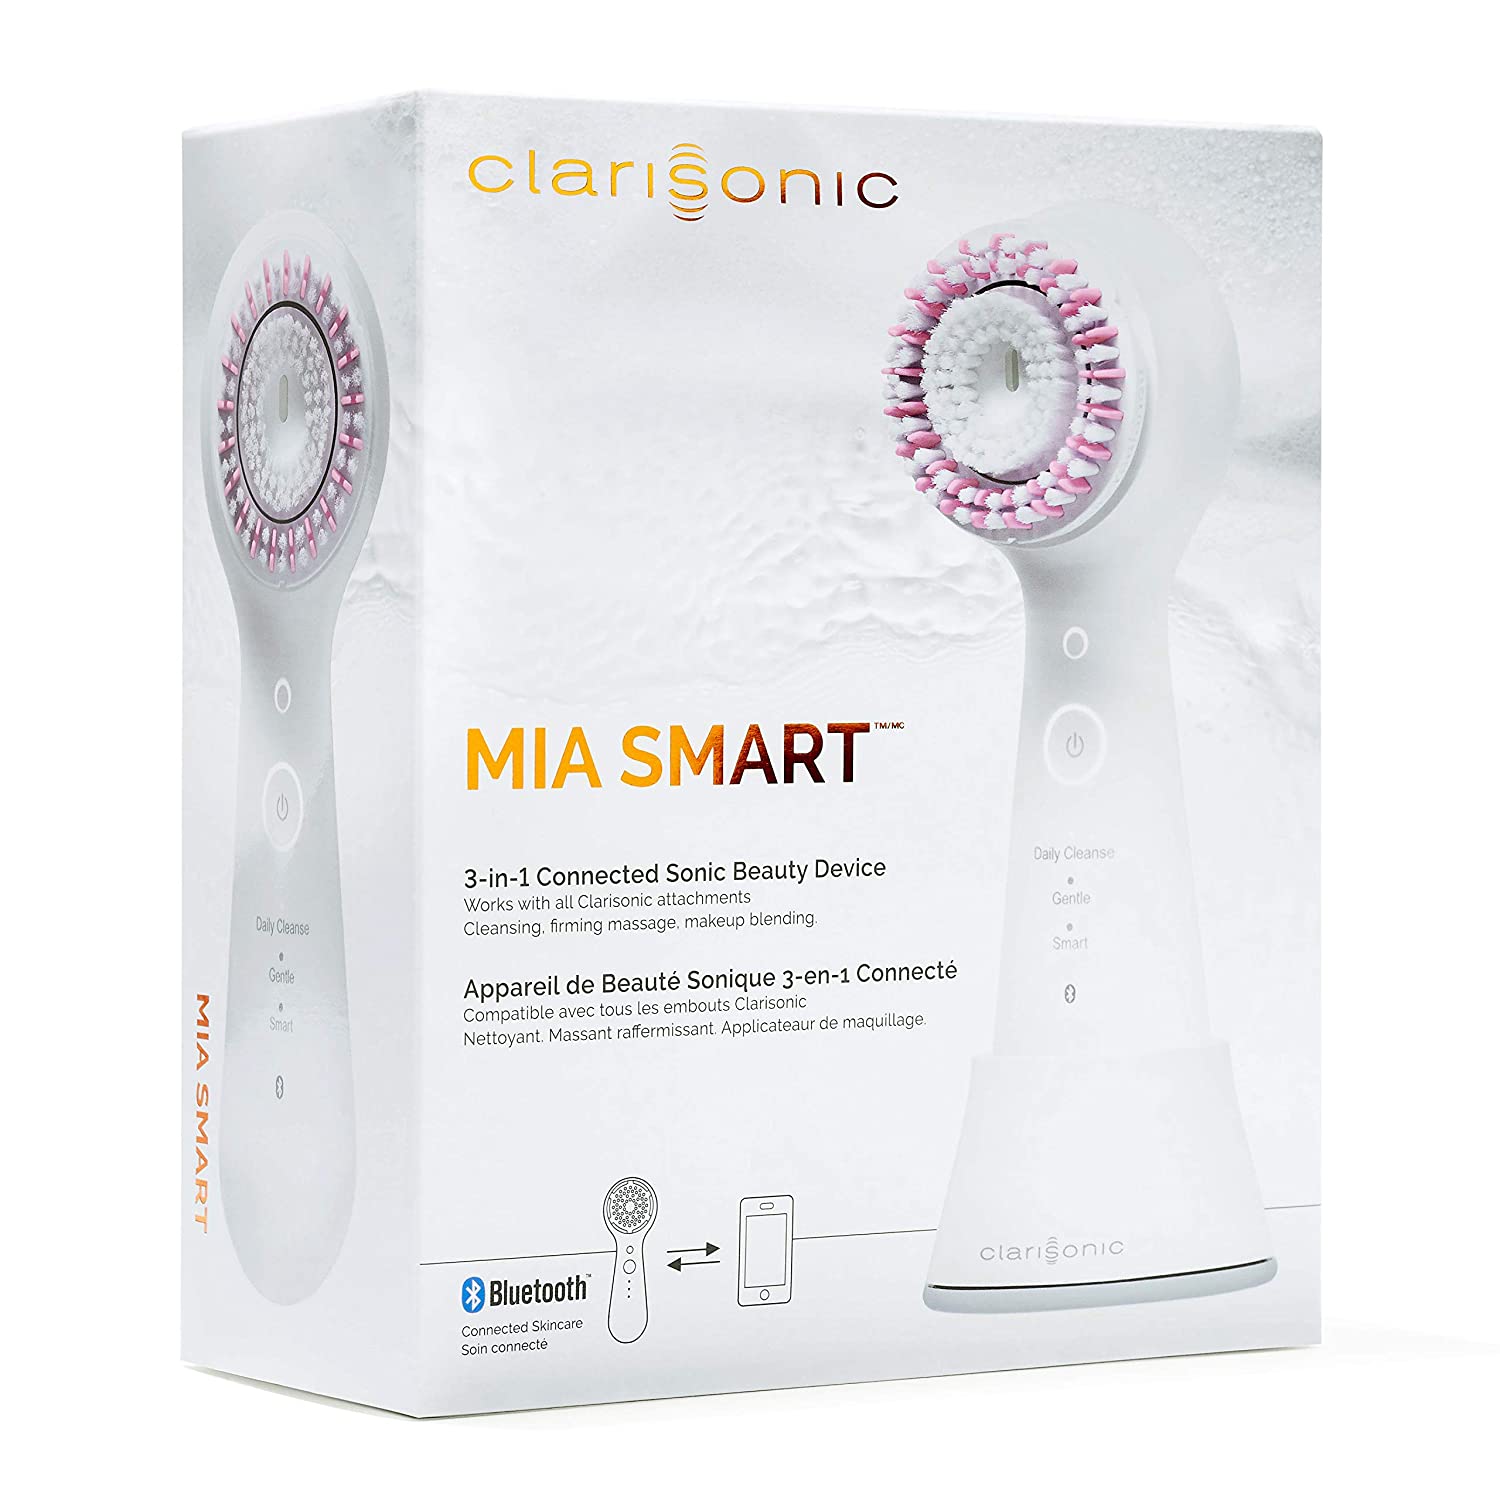 Clarisonic Mia Smart 3-in-1 Connected Sonic Beauty Device